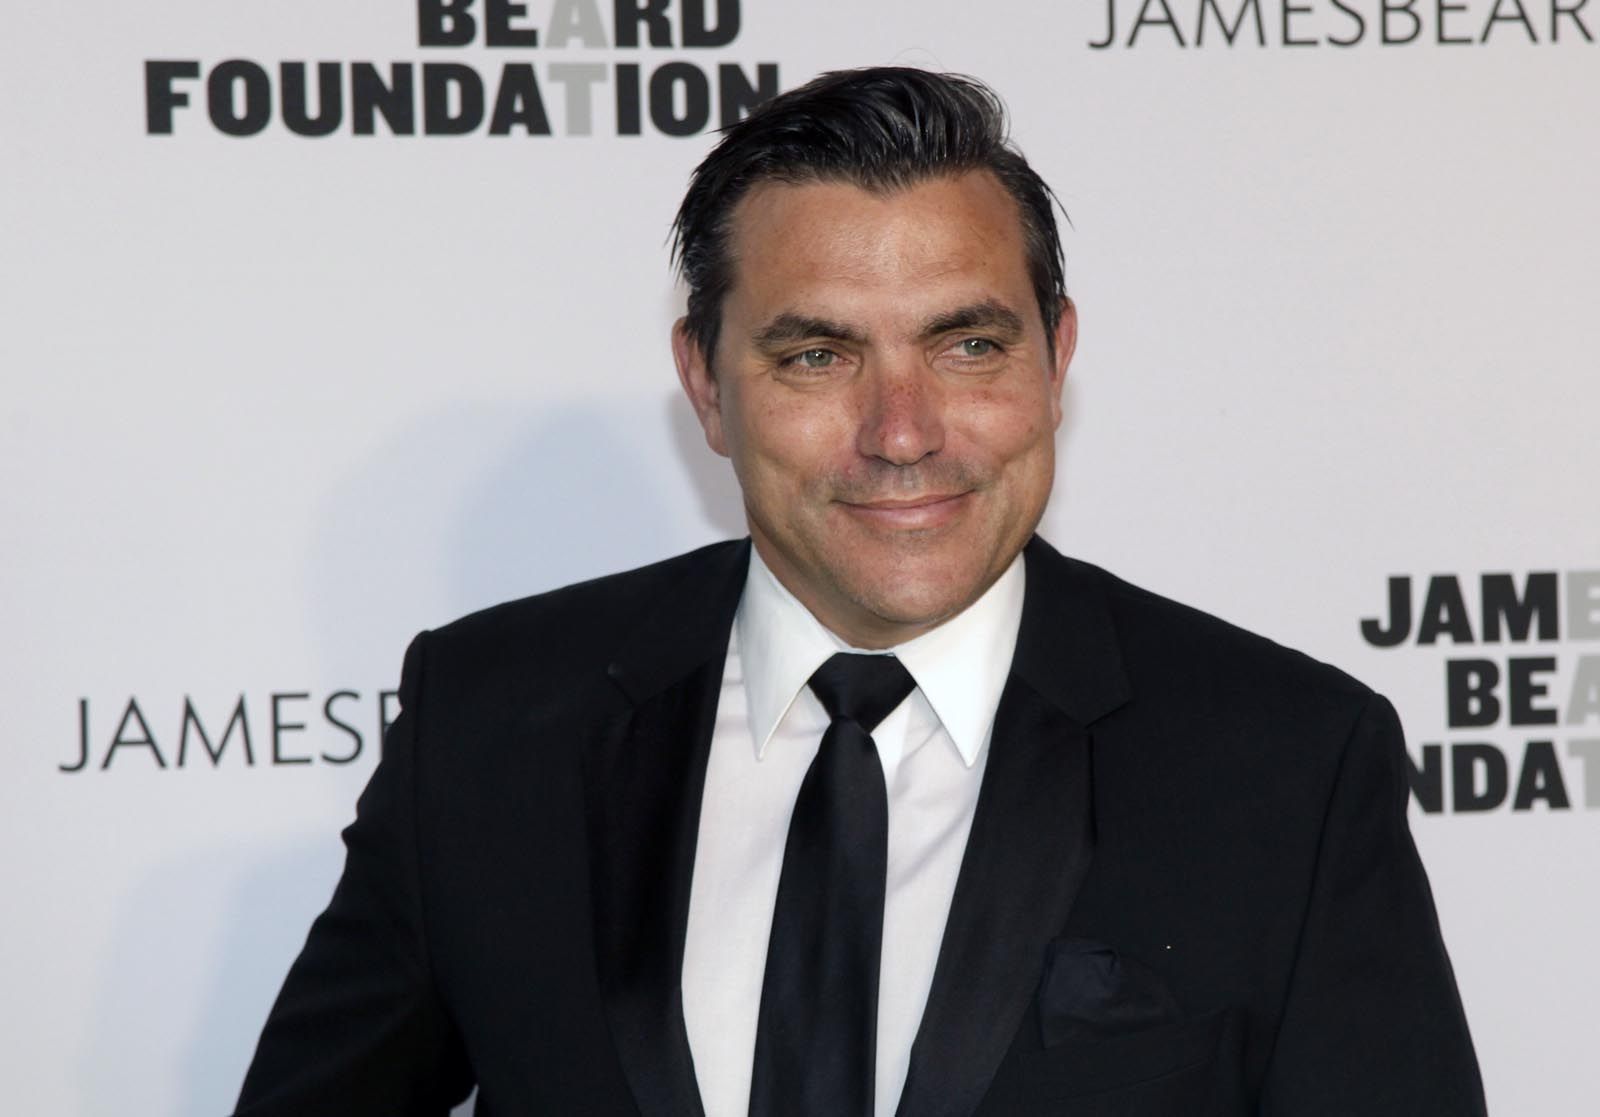 Restaurateur Todd English seen here at the 2014 James Beard Foundation Awards will be opening his first restaurant in Maryland at Maryland Live! casino at Arundel Mills as part of its $200 million expansion. (Photo by Andy Kropa/Invision/AP)